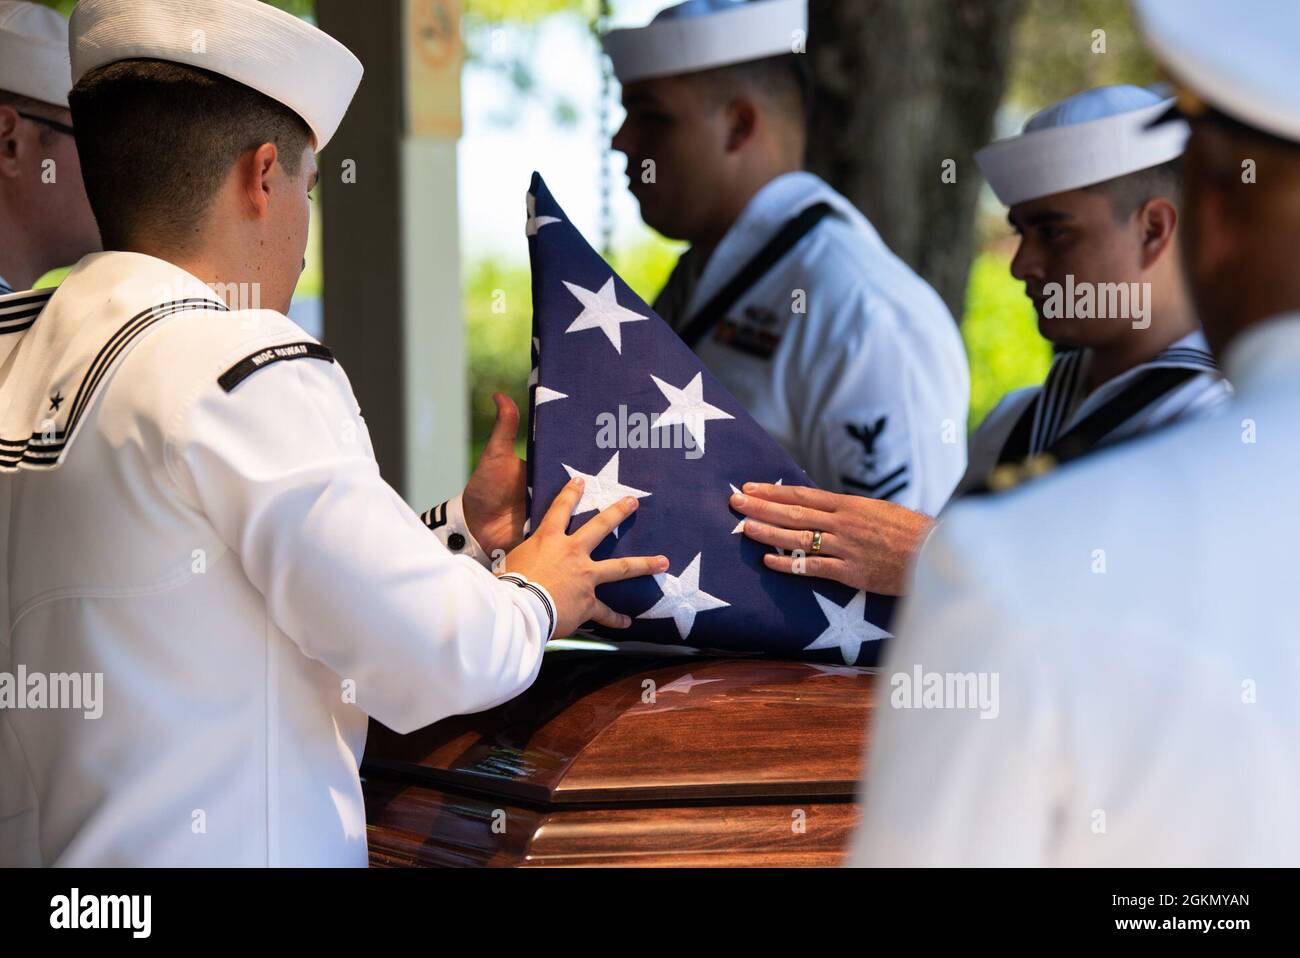 Sailors assigned to Navy Region Hawaii and the Defense POW/MIA Accounting Agency (DPAA) conduct a funeral for U.S. Navy Navy Seaman 1st Class Camillus M. O’Grady, 19, of Greenleaf, Kansas, at the National Memorial Cemetery of the Pacific, Honolulu, Hawaii, June 1, 2021. O’Grady was assigned to the USS Oklahoma, which sustained fire from Japanese aircraft and multiple torpedo hits causing the ship to capsize and resulted in the deaths of more than 400 crew members on Dec. 7, 1941, at Ford Island, Pearl Harbor. O’Grady was recently identified through DNA analysis by the DPAA forensic laboratory Stock Photo